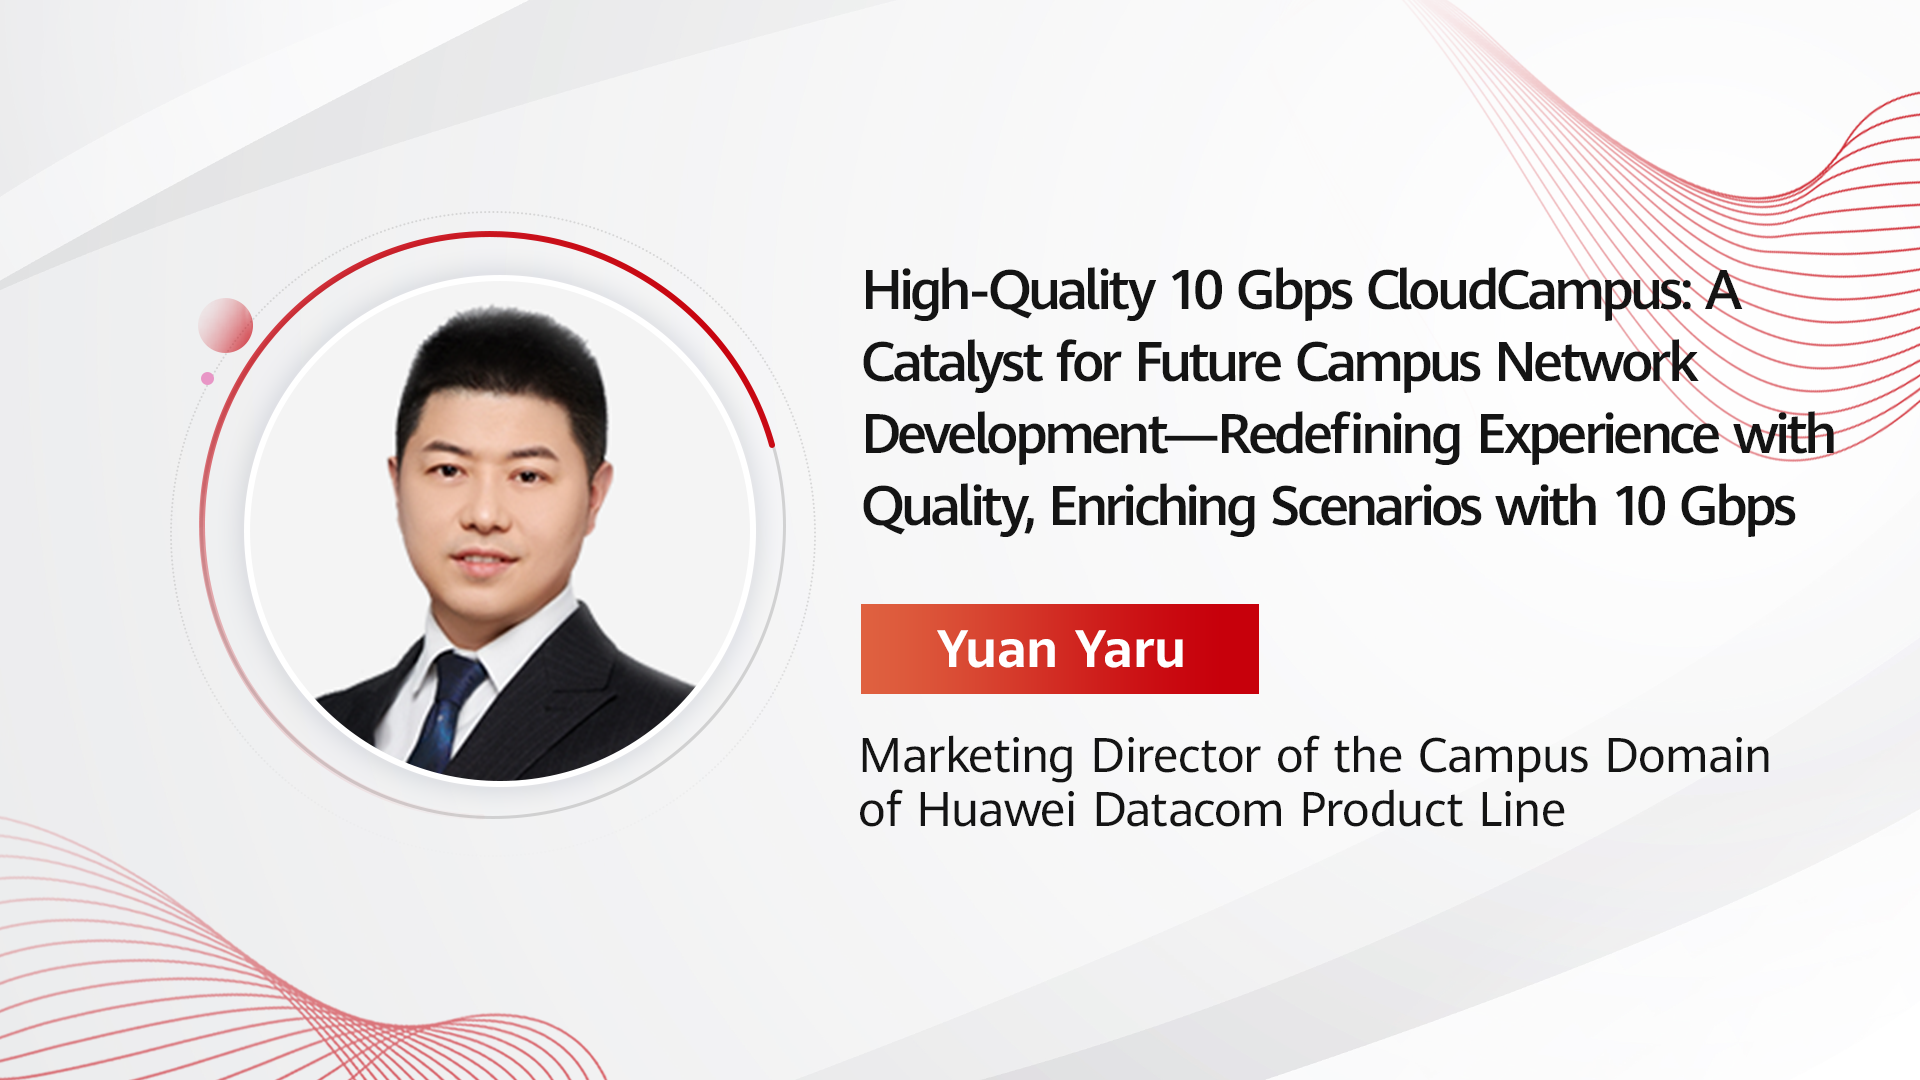 High-Quality 10 Gbps CloudCampus: A Catalyst for Future Campus Network Development — Redefining Experience with Quality, Enriching Scenarios with 10 Gbps